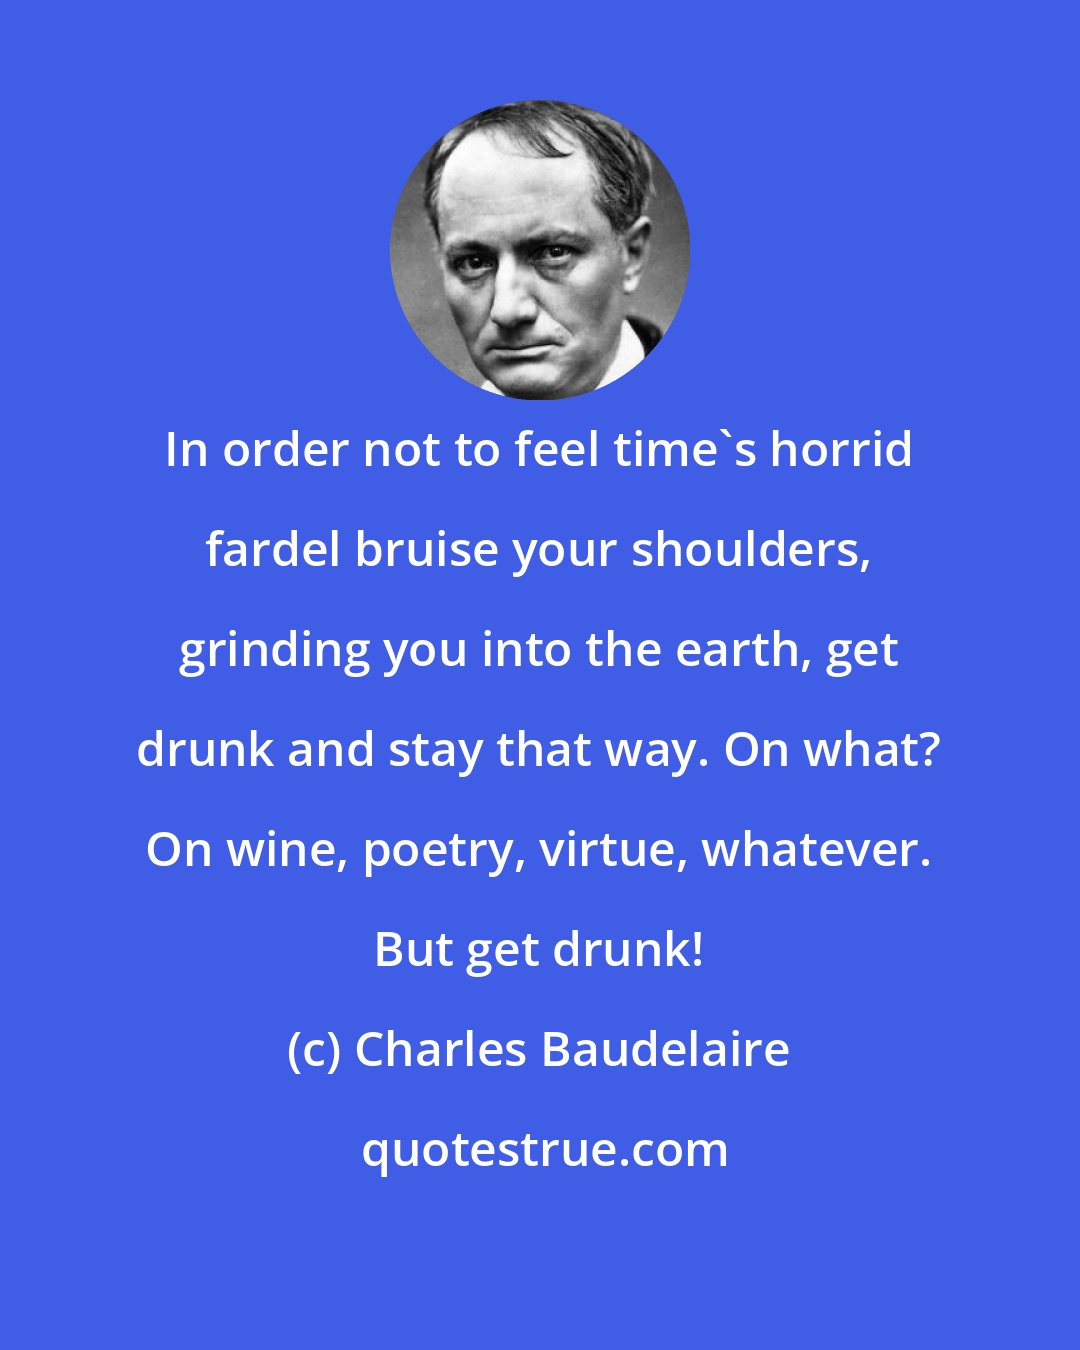 Charles Baudelaire: In order not to feel time's horrid fardel bruise your shoulders, grinding you into the earth, get drunk and stay that way. On what? On wine, poetry, virtue, whatever. But get drunk!